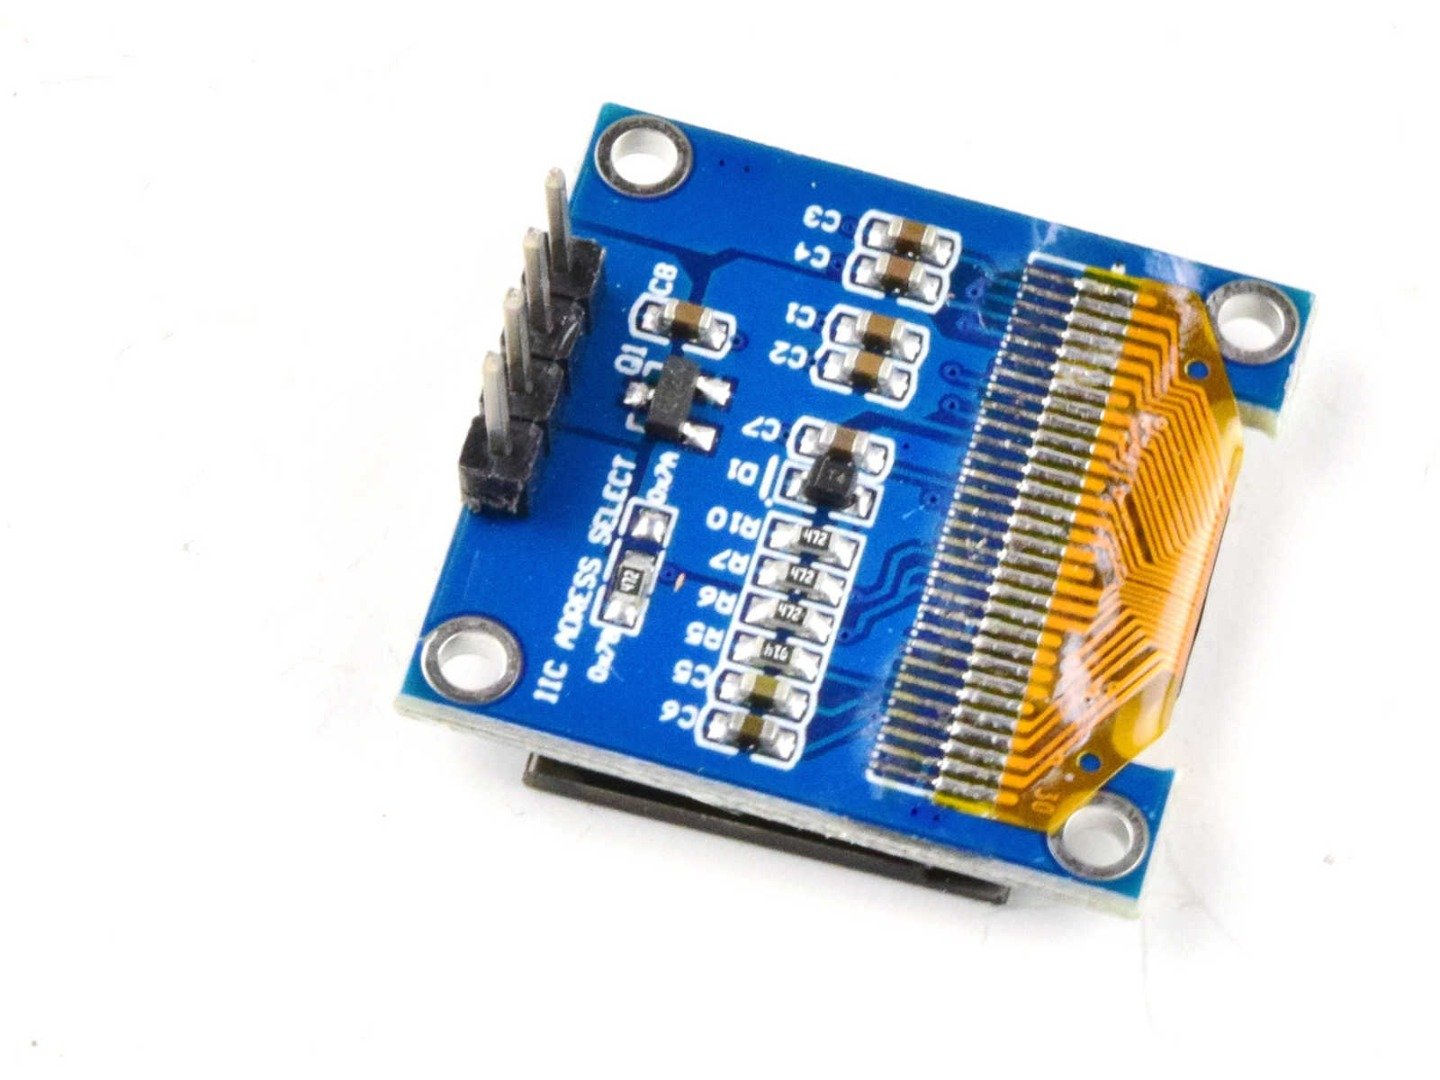 OLED 128×64 Pixel, I2C, 0.96 inch, SSD1306 SH1106, 3-5V (100% compatible with Arduino) 5